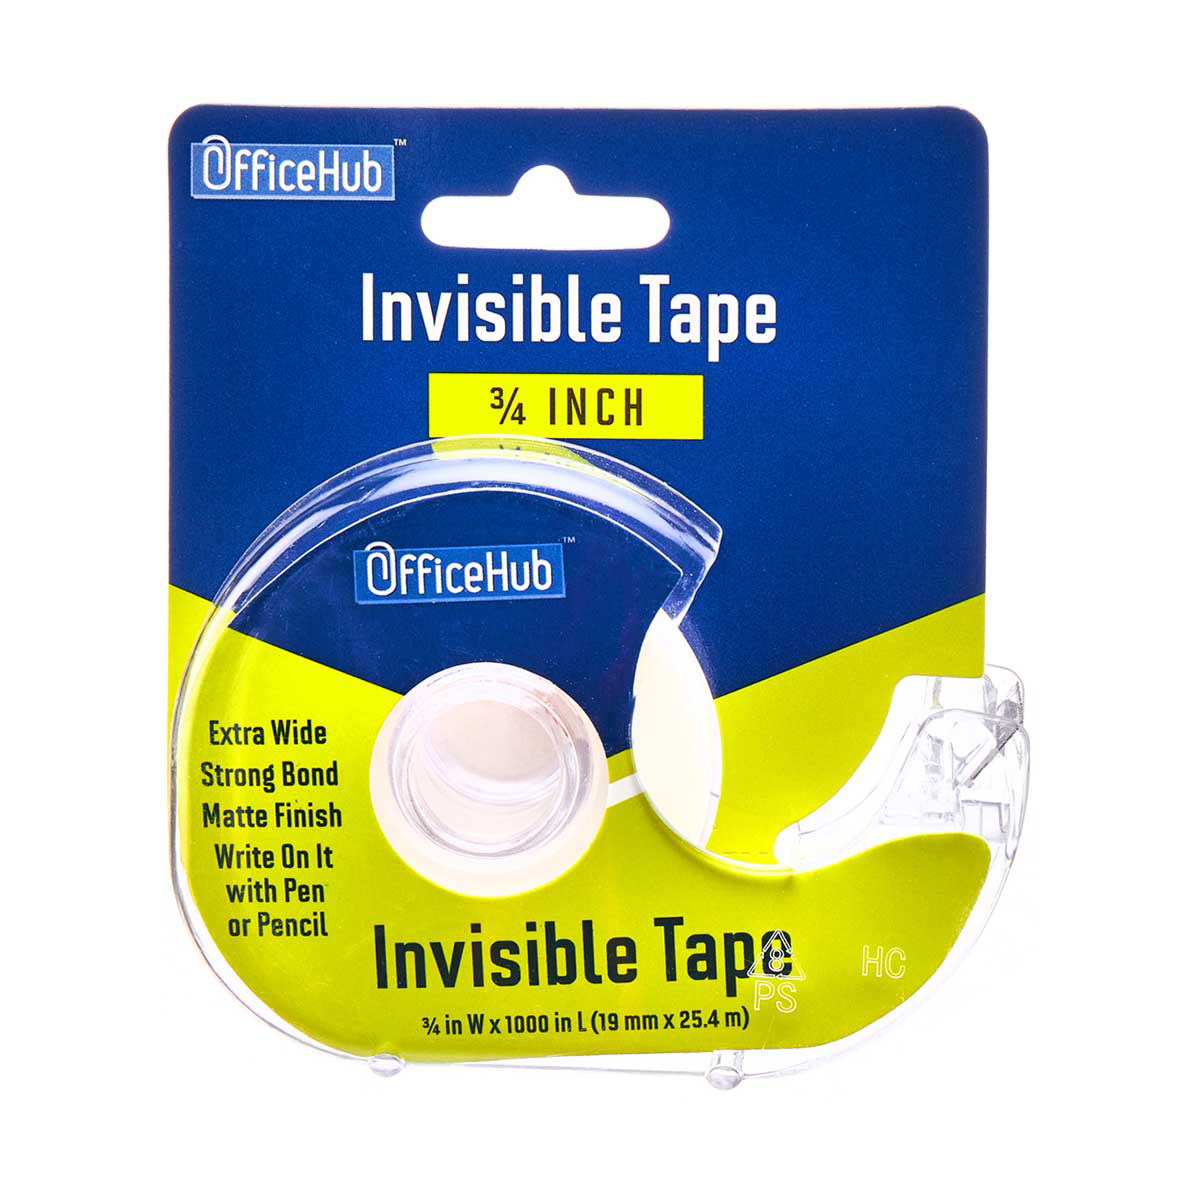 OfficeHub Invisible Tape